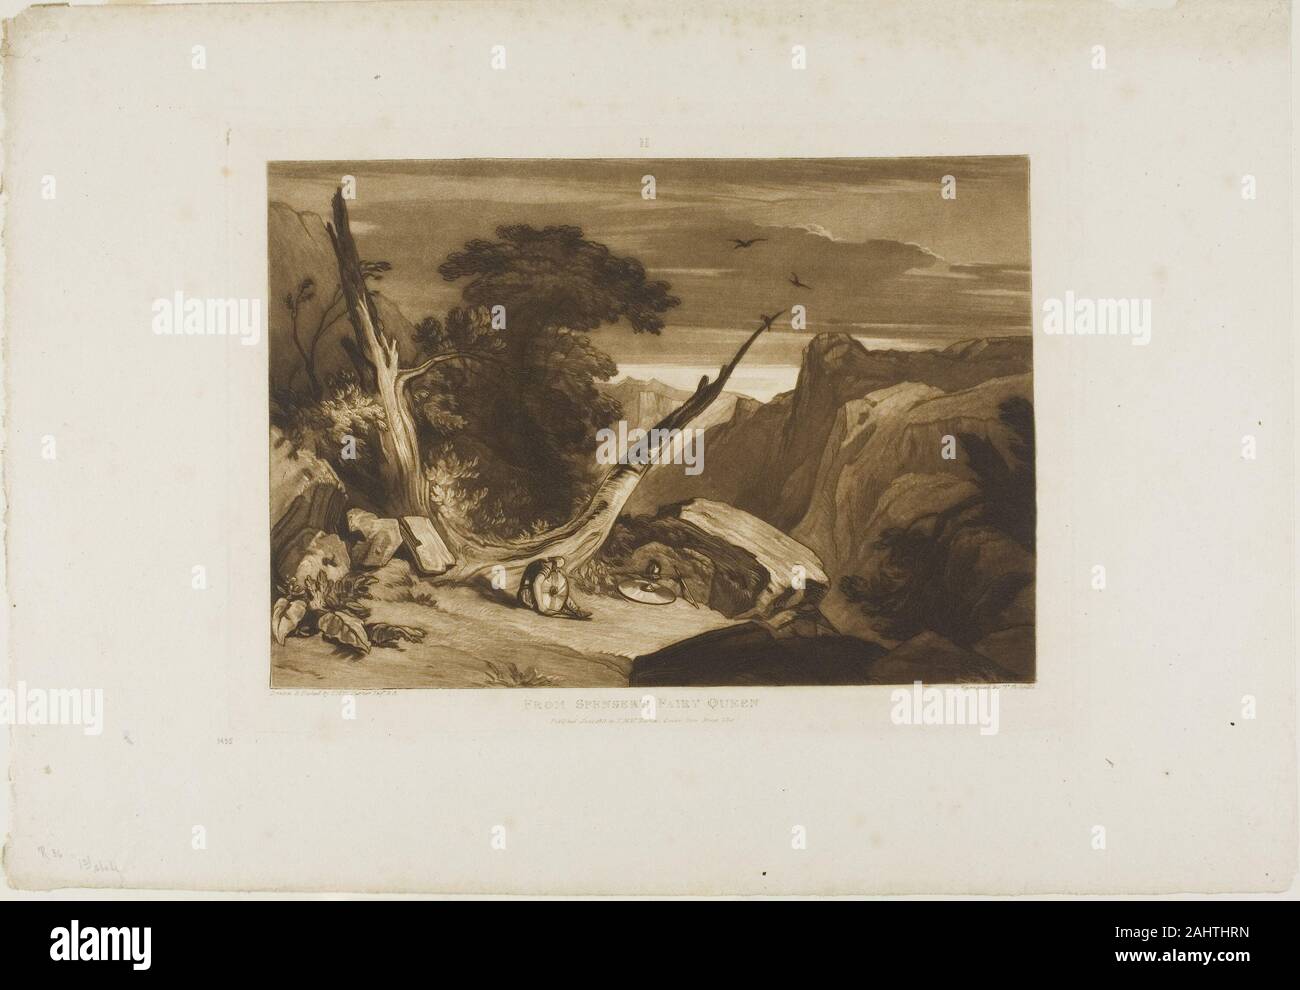 Joseph Mallord William Turner. From Spenser's Fairy Queen, plate 36 from Liber Studiorum. 1811. England. Etching and engraving in brown on ivory wove paper Stock Photo